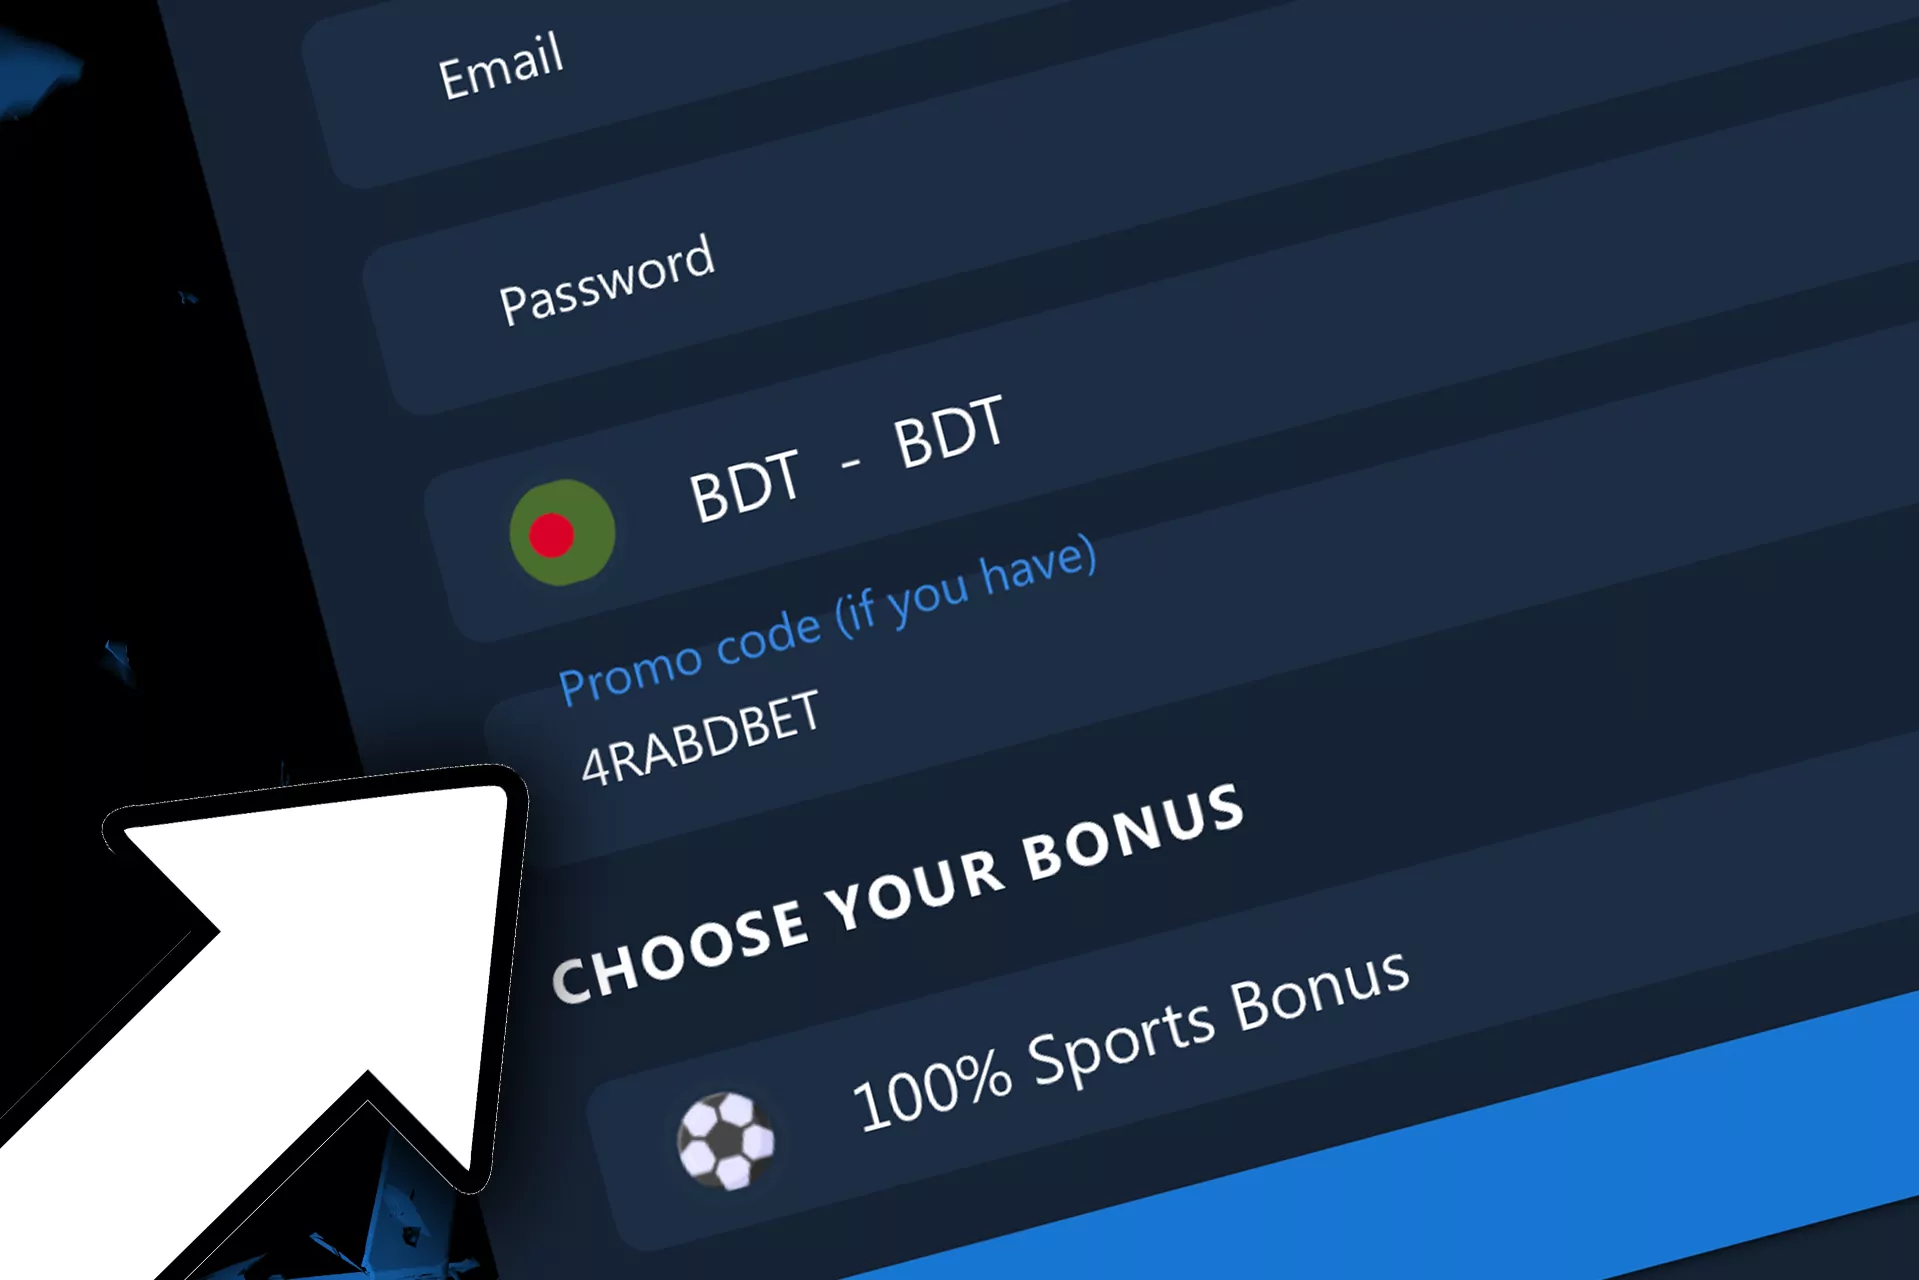 Use our promo code to get even more bonuses.